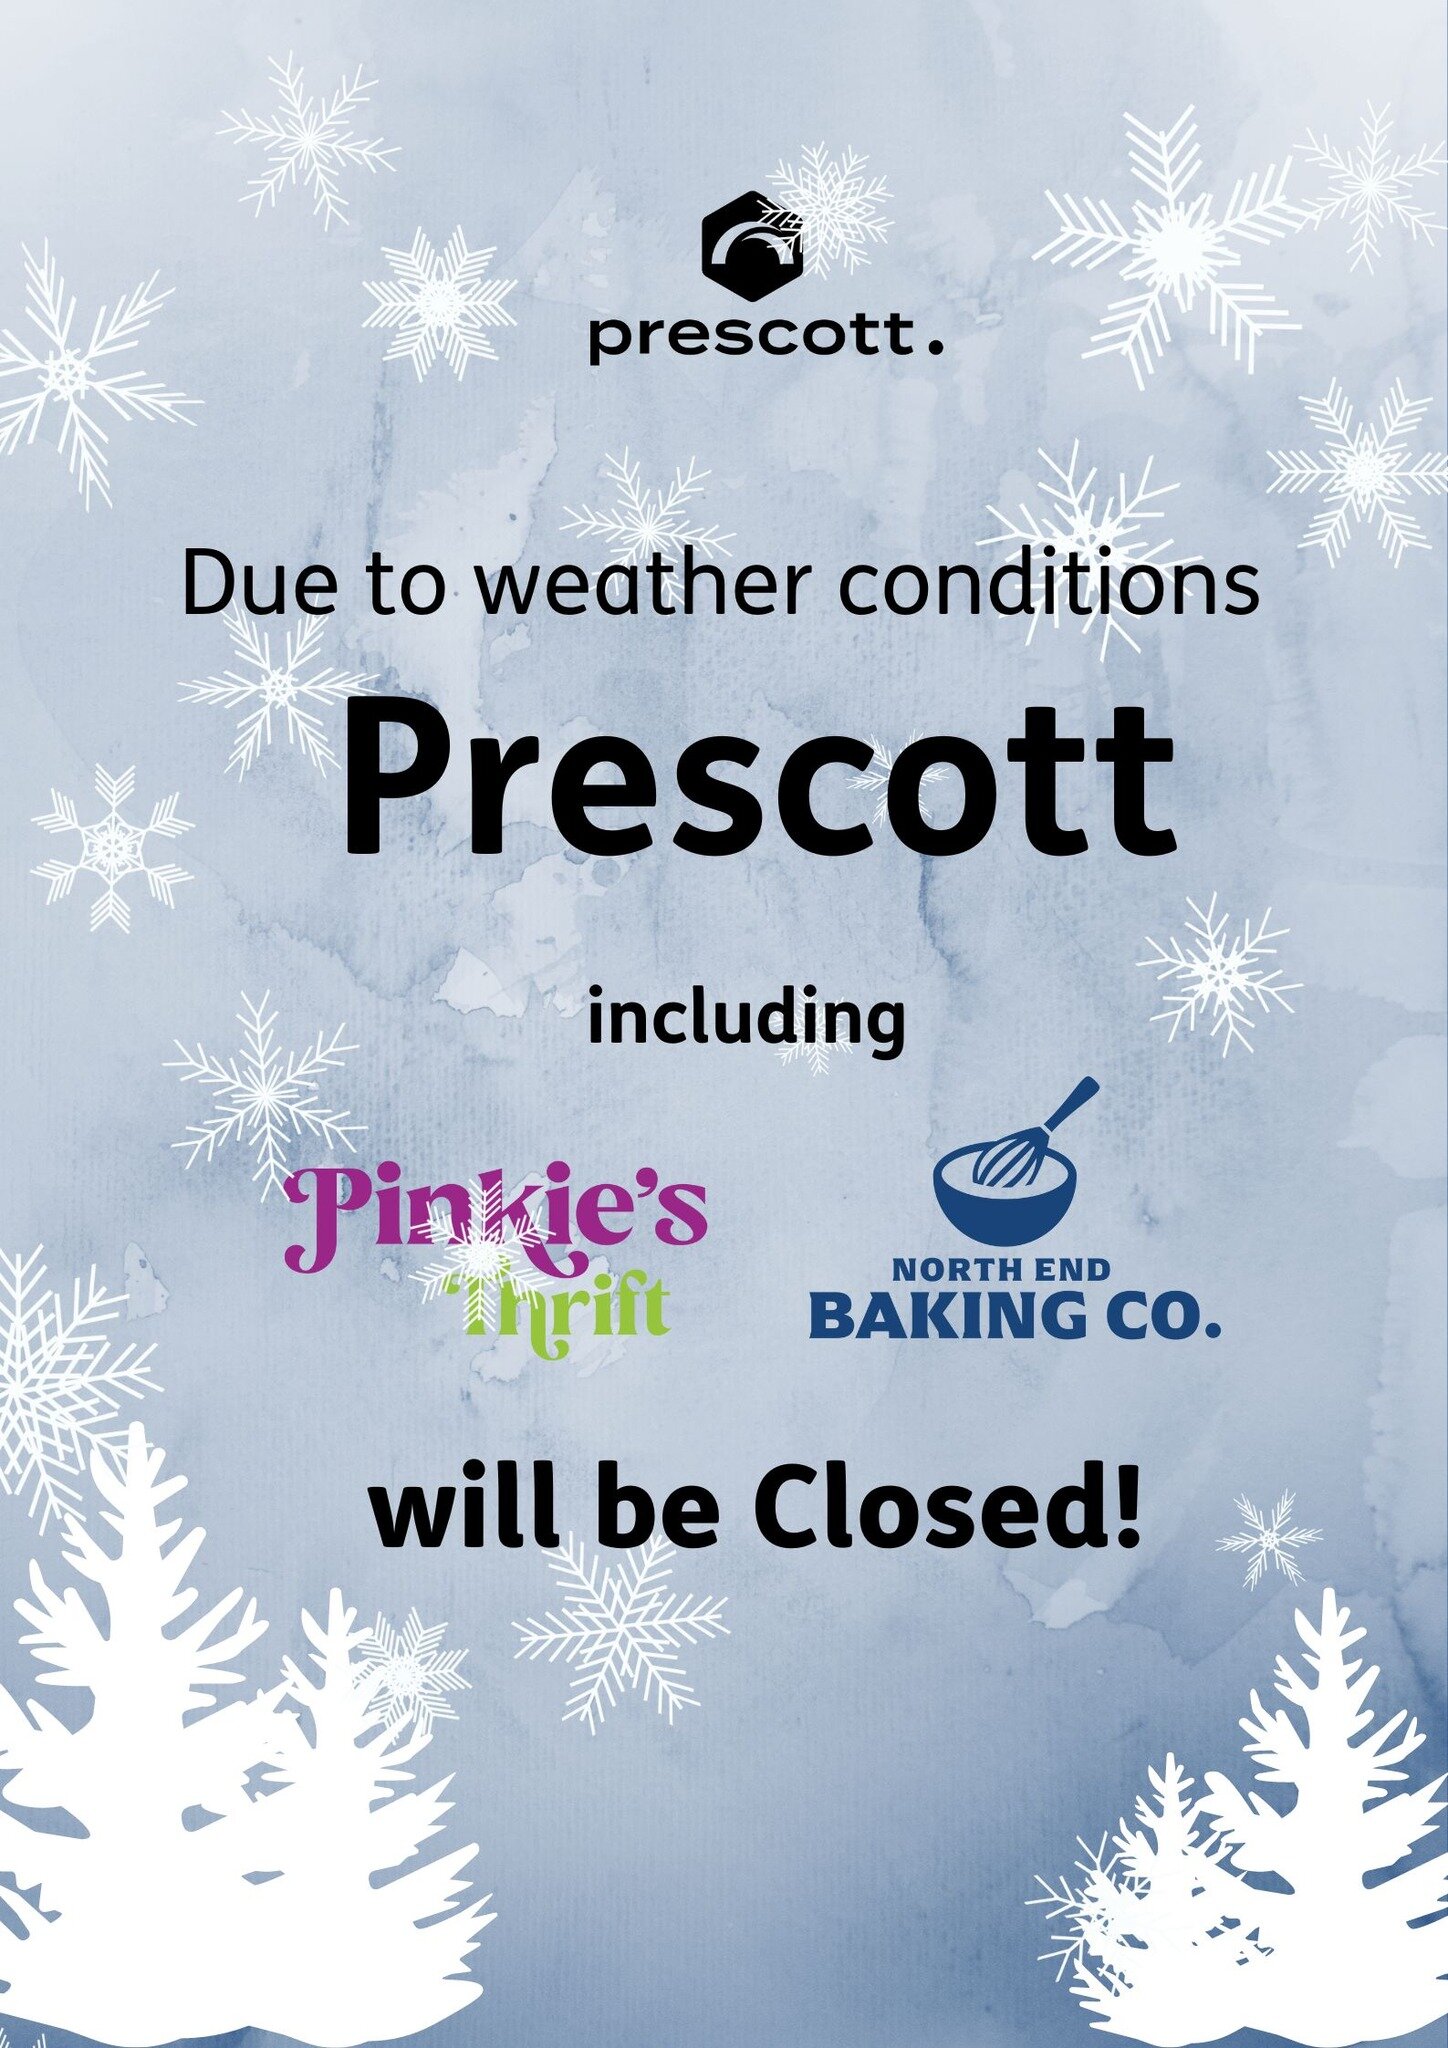 Hey folks, 

We are closed today. Stay safe out there!